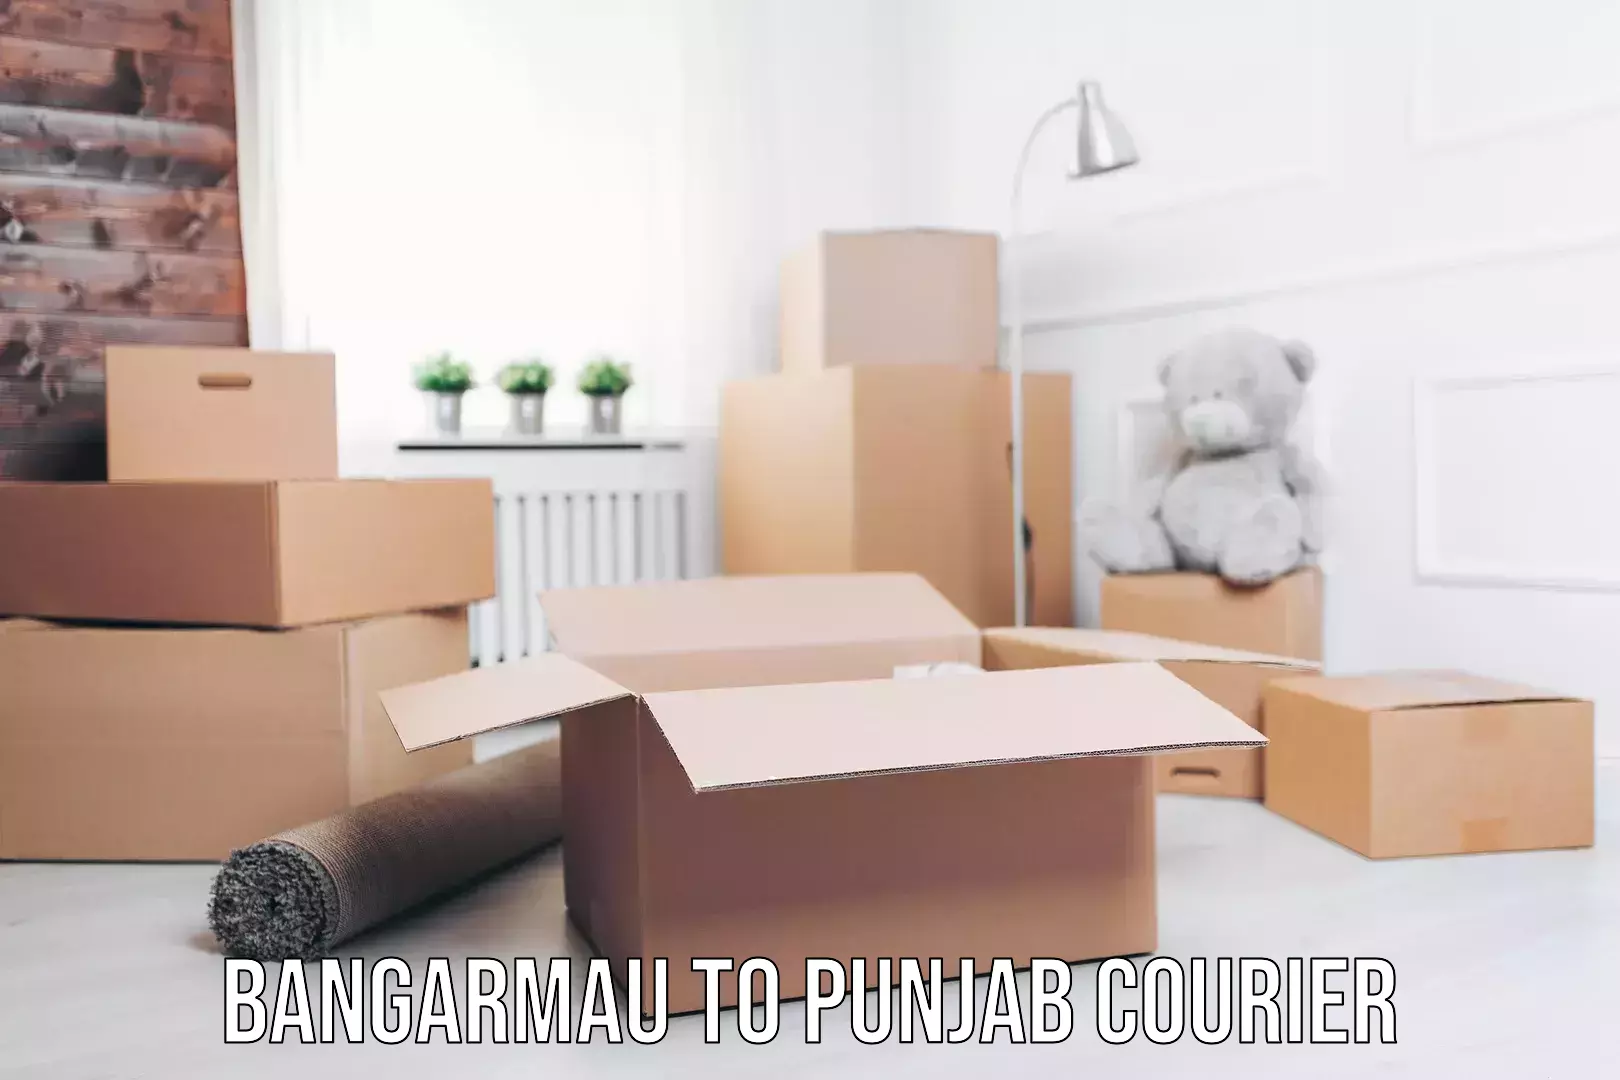 Courier dispatch services in Bangarmau to Punjab